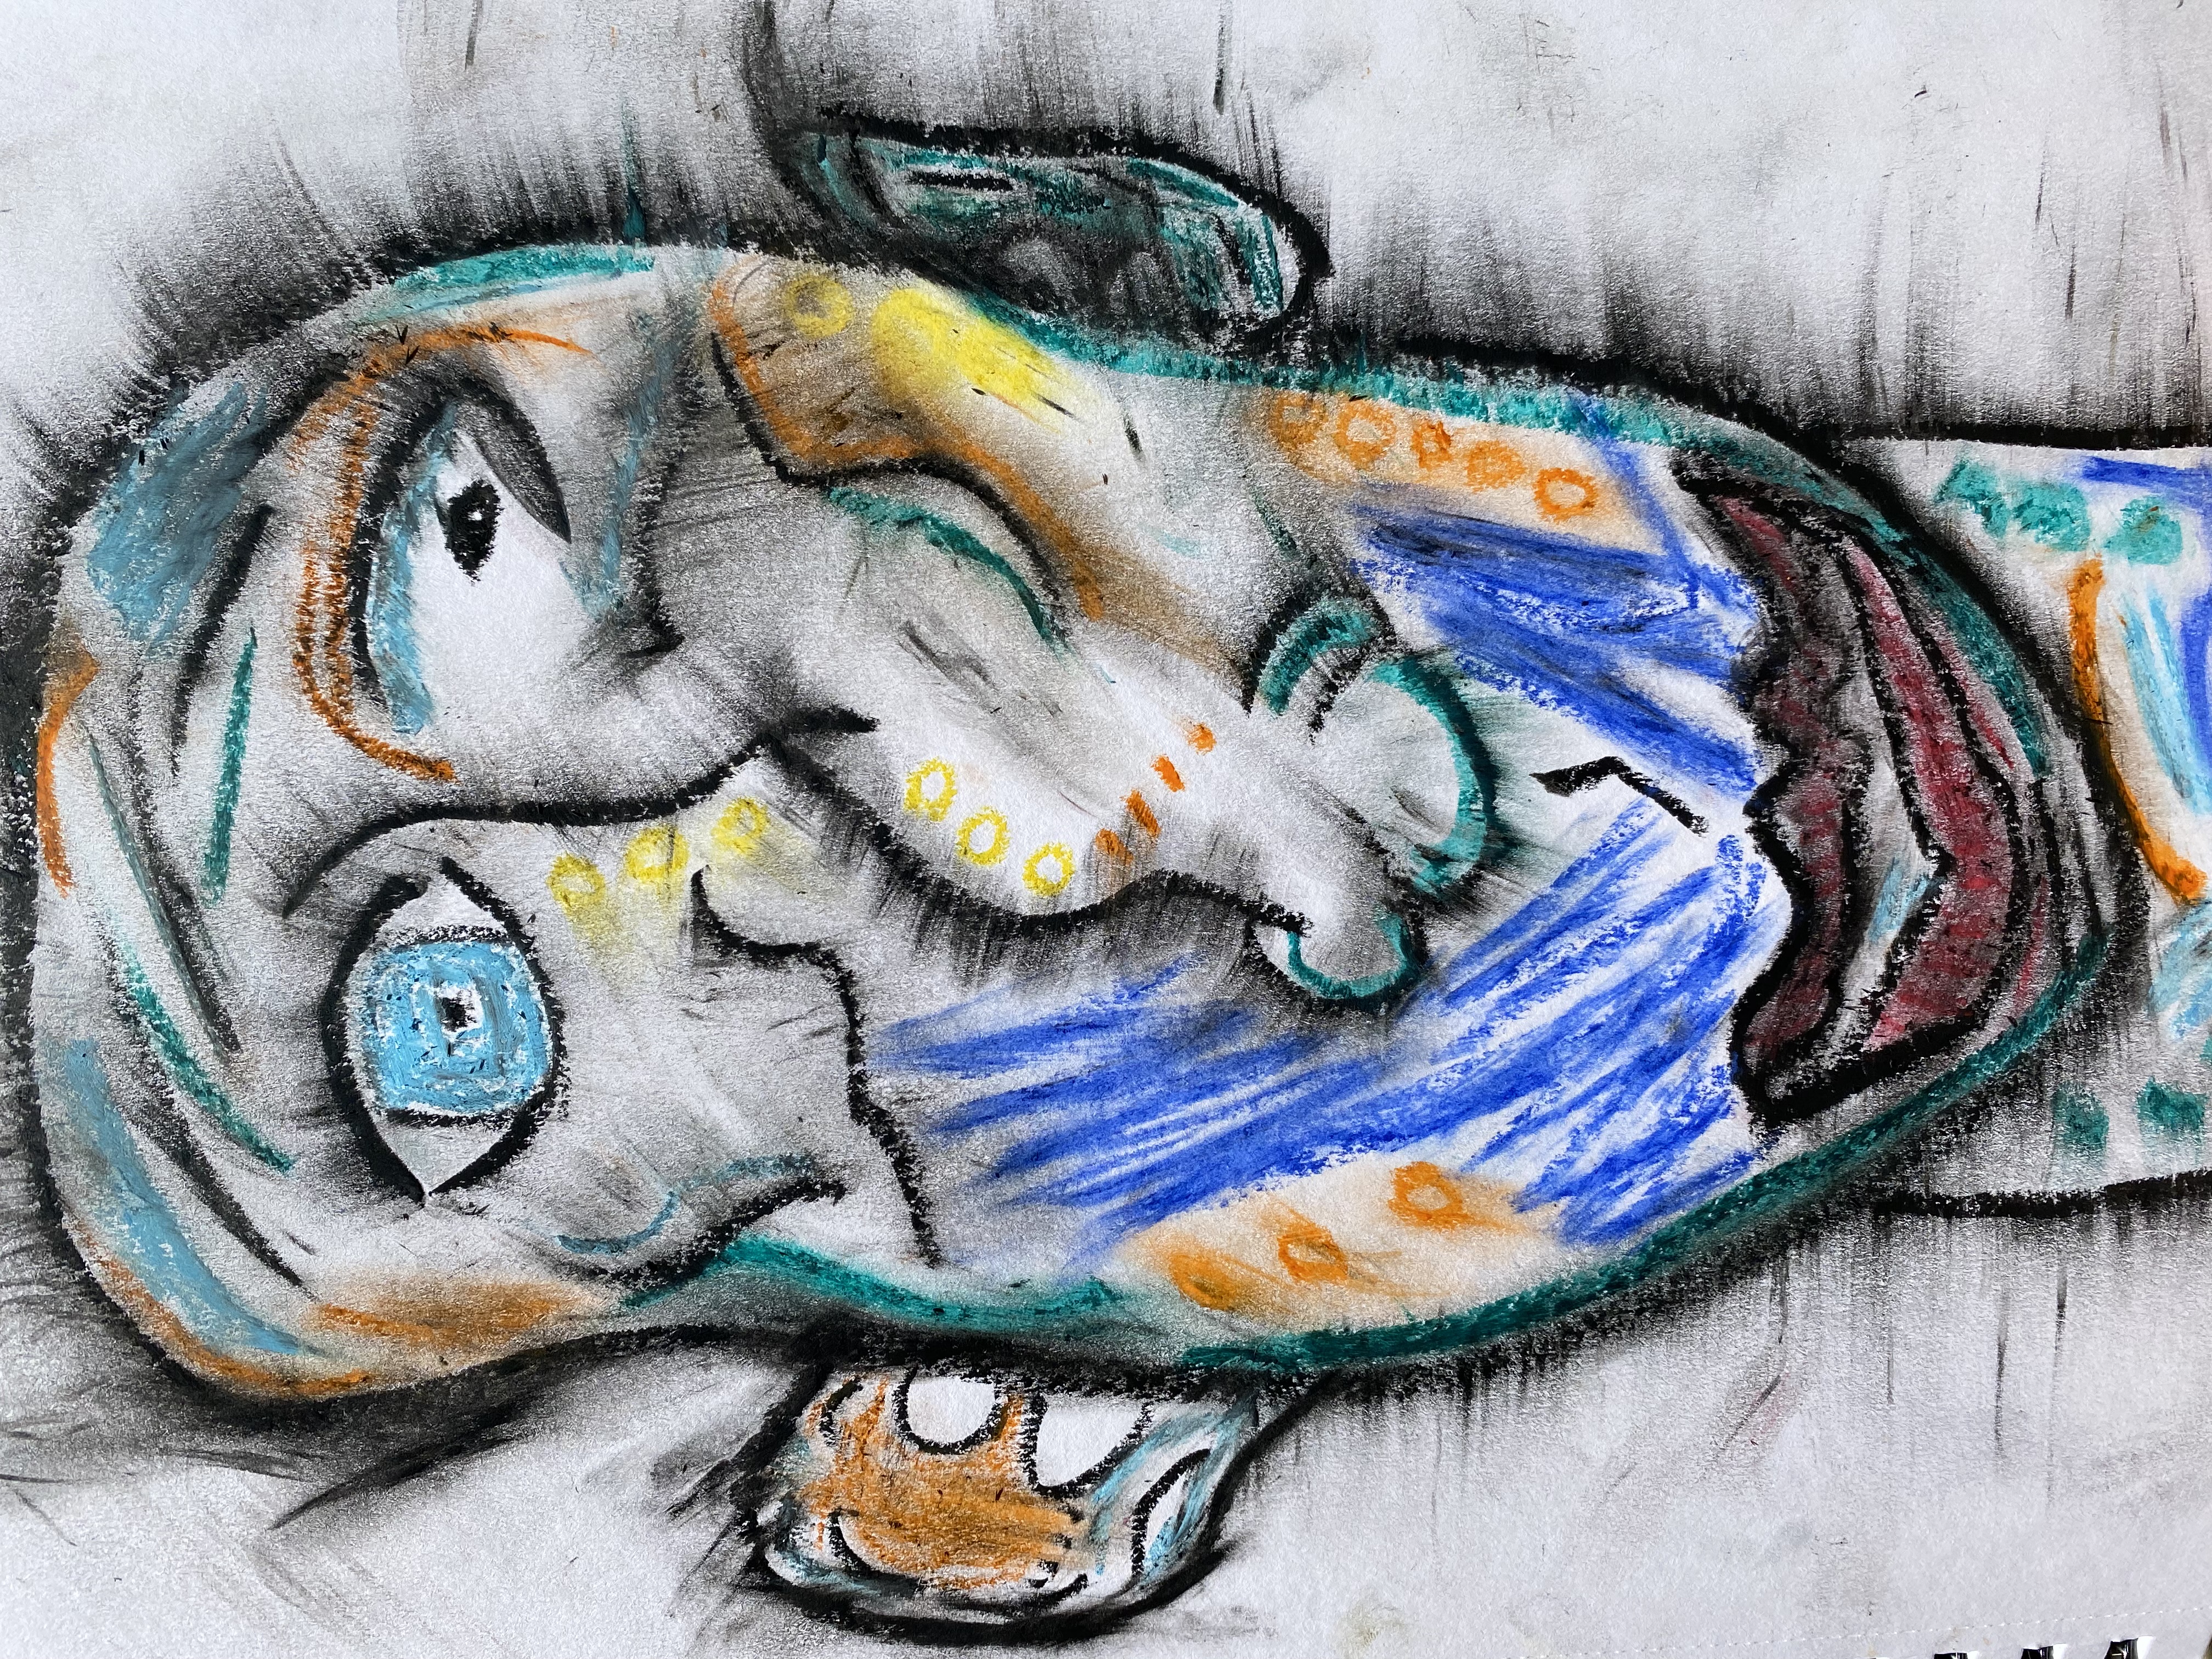 abstract sketch of a face made with the artist loft's oil pastels. colors include: orange, teal blue, black, light blue, yellow, and red.